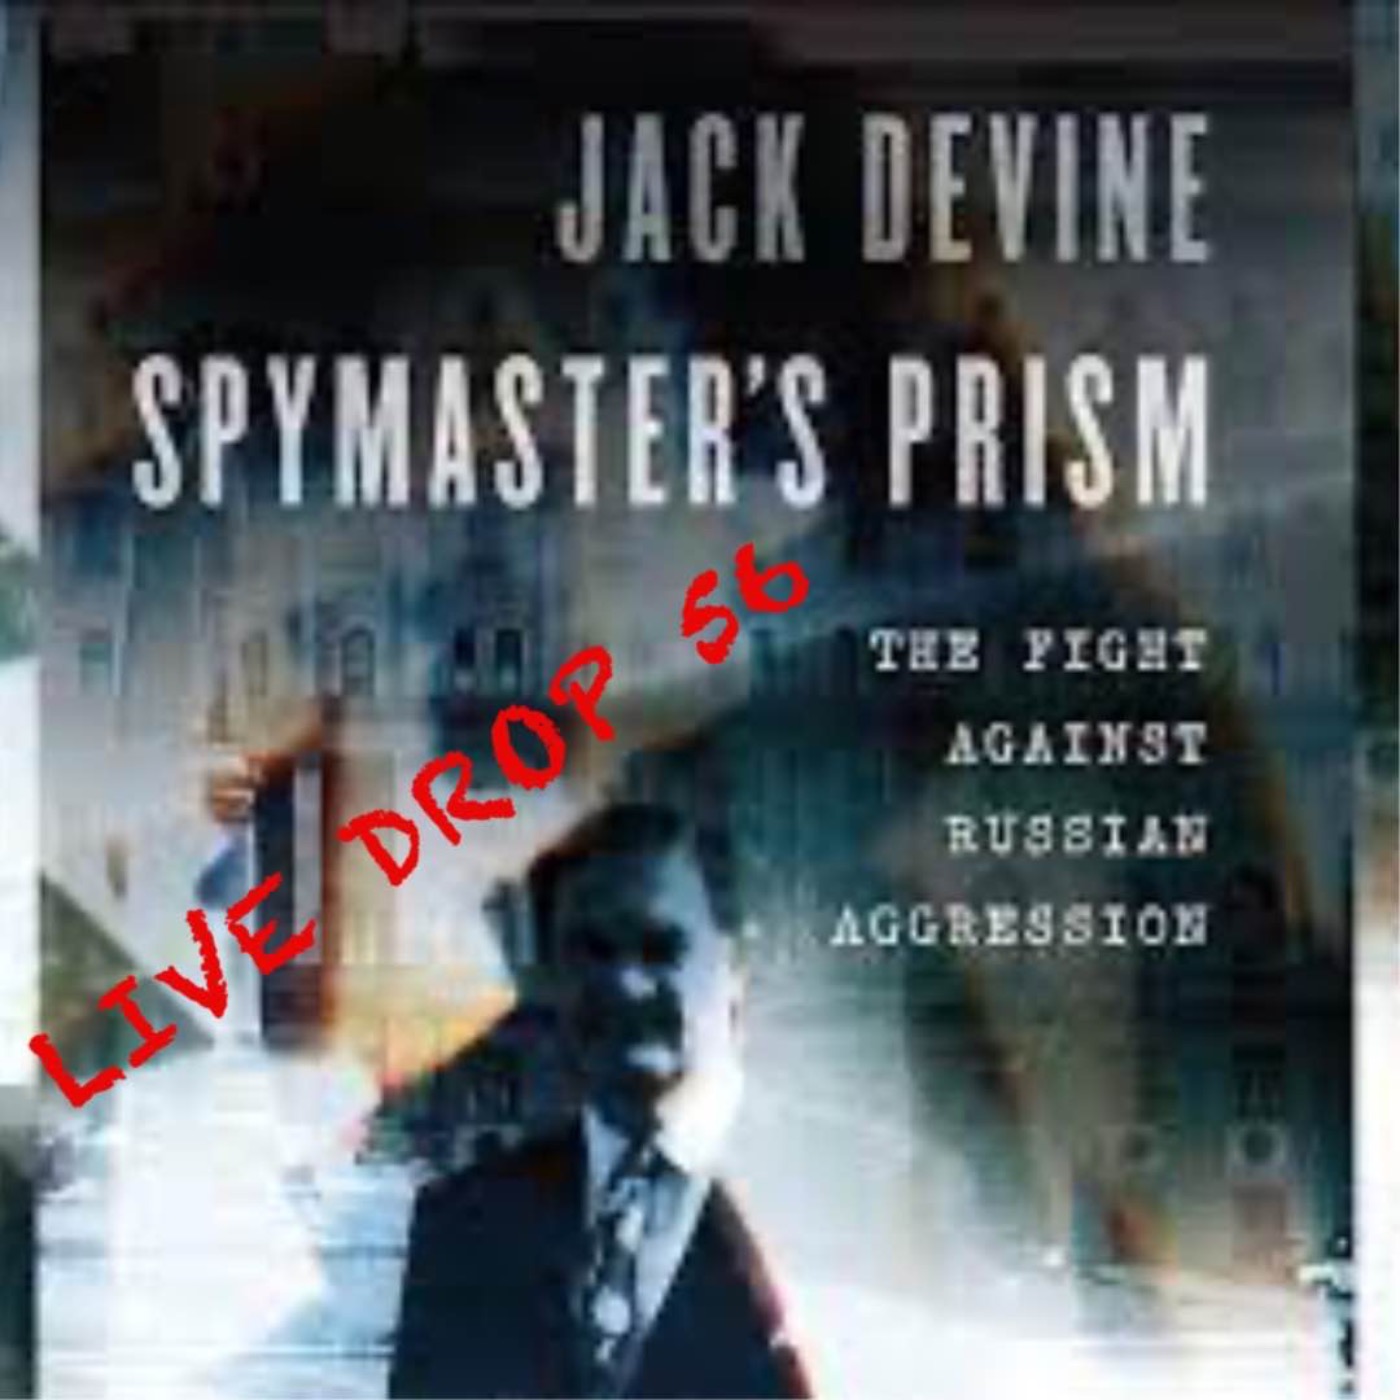 A Spymaster and a Gentleman, Jack Devine Dispels CIA Myth and Dispenses his Truth